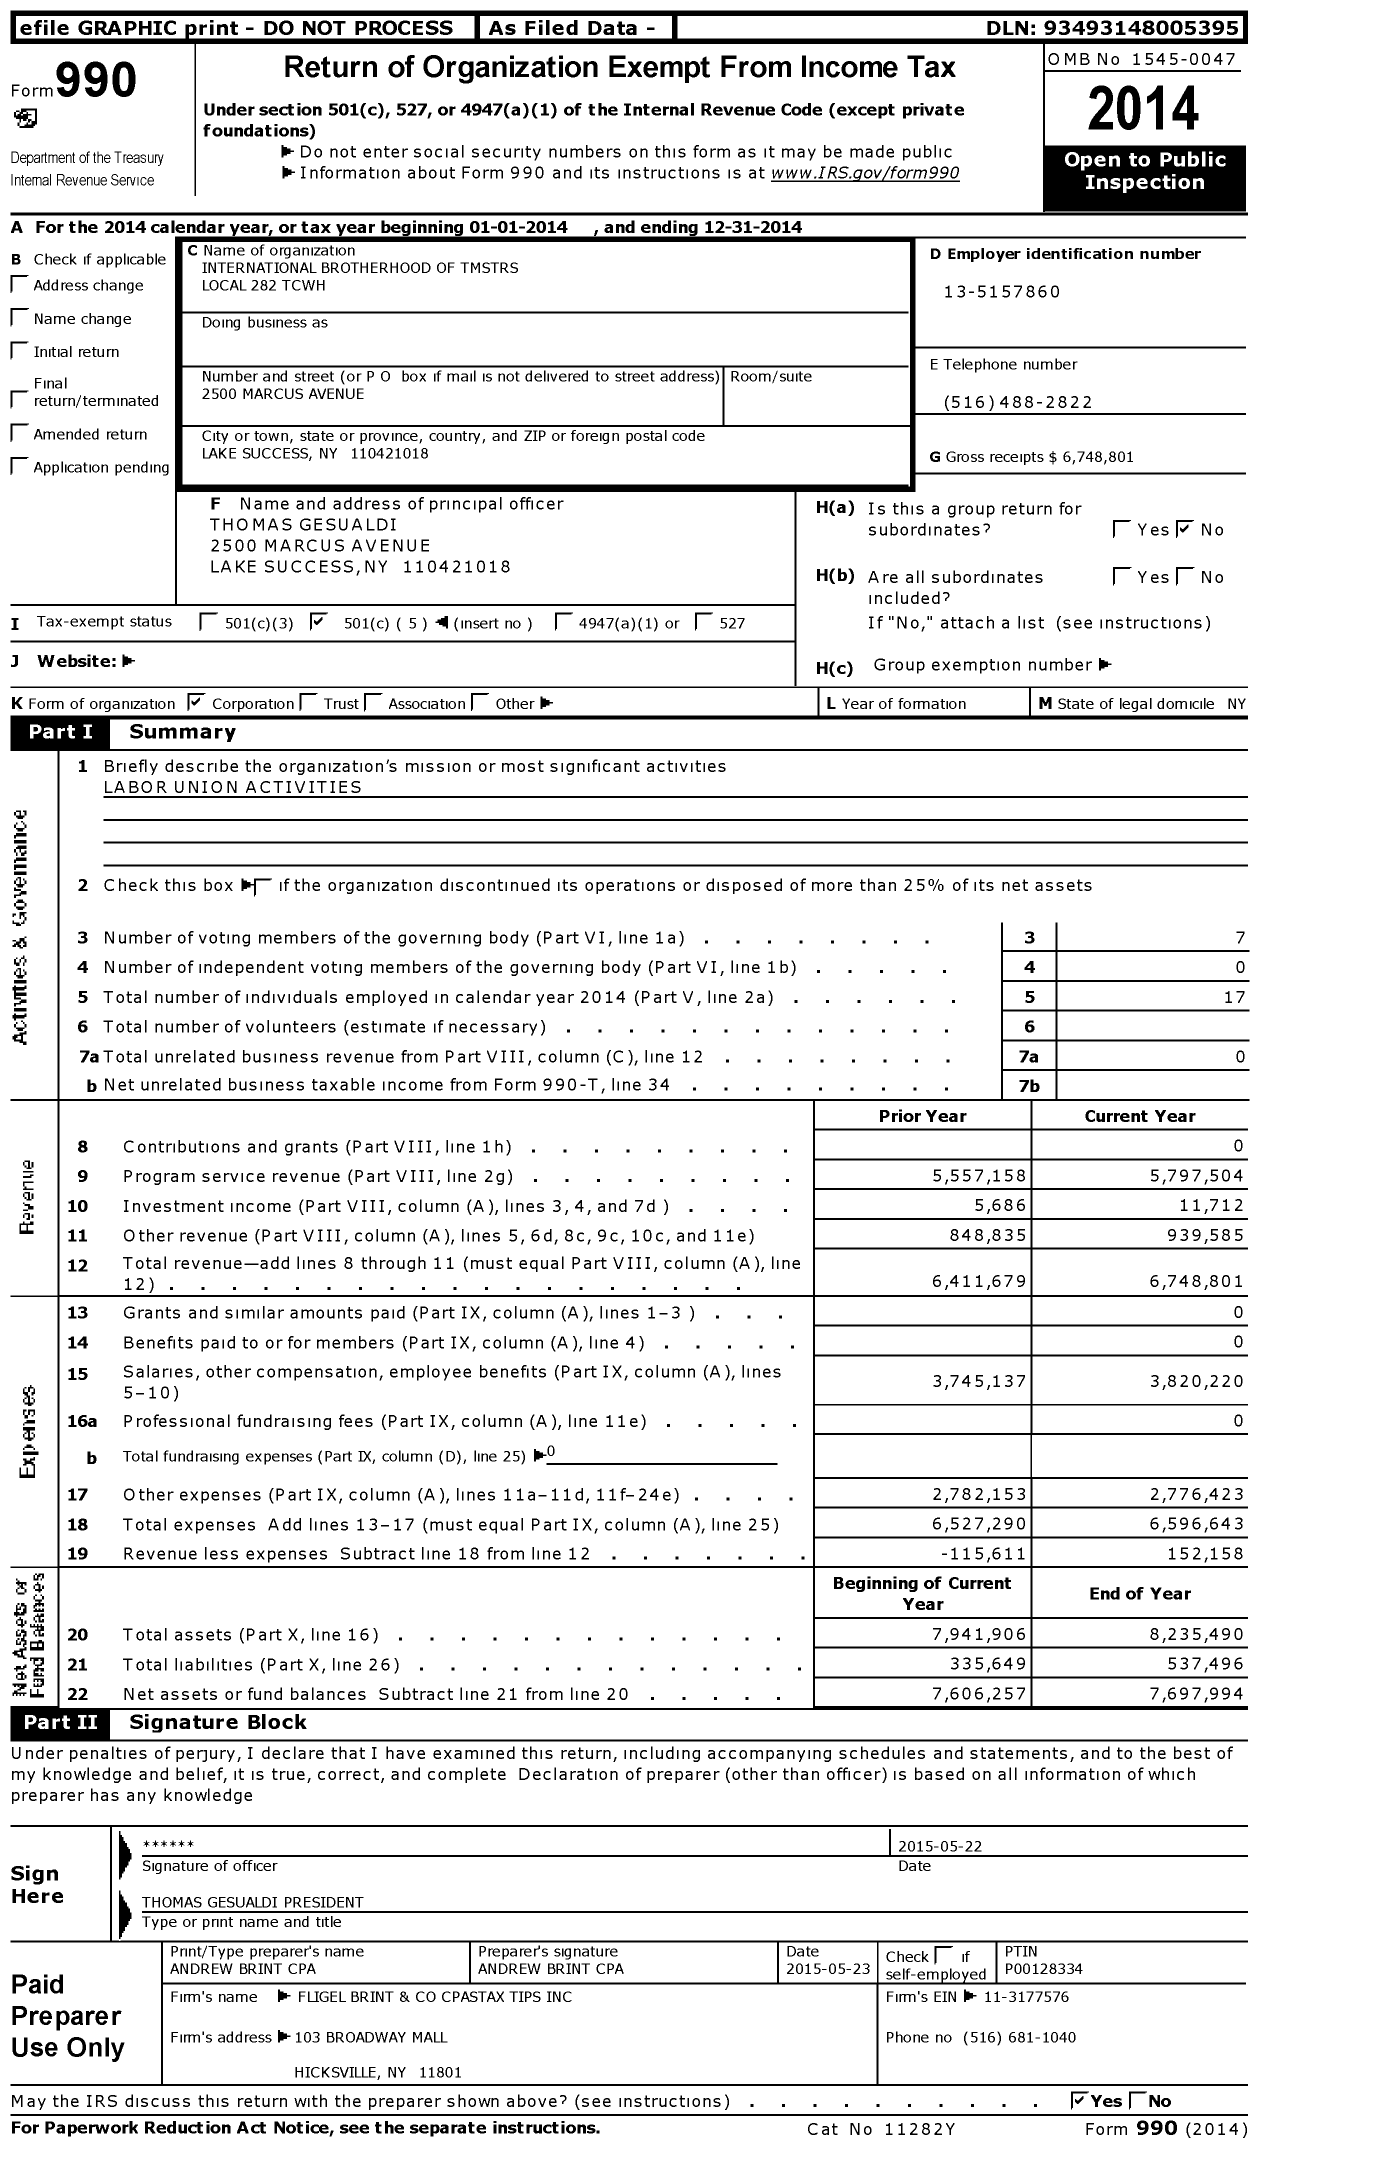 Image of first page of 2014 Form 990O for Teamsters - Local 282 TCWH